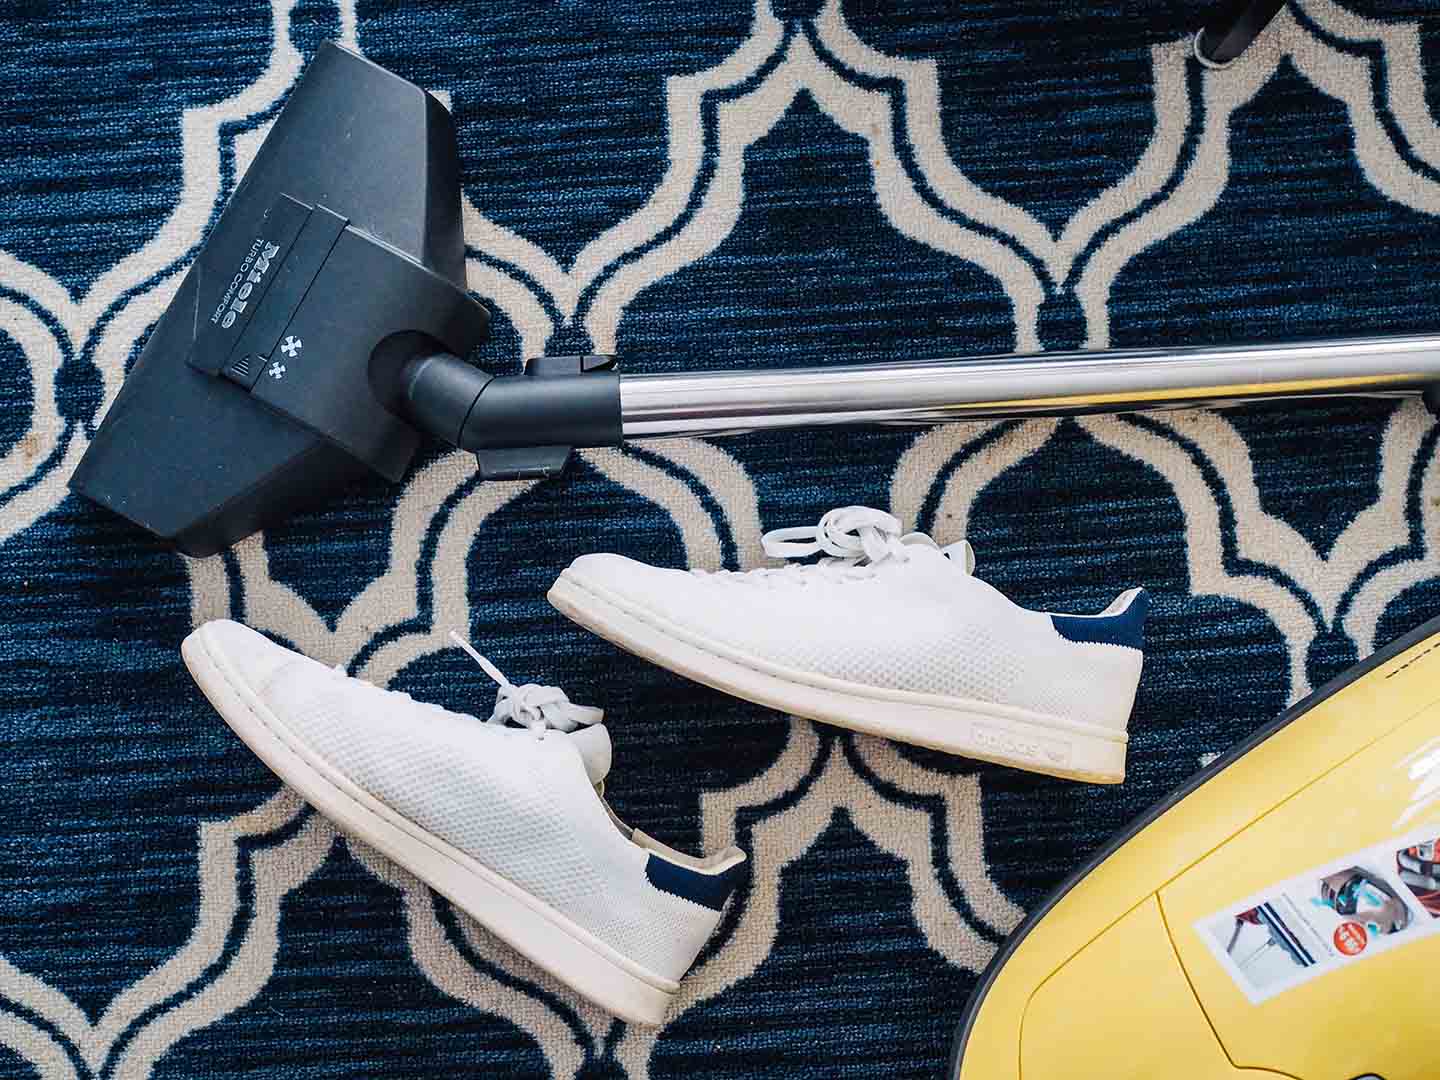 healthier home vacuum and shoes on blue carpet 